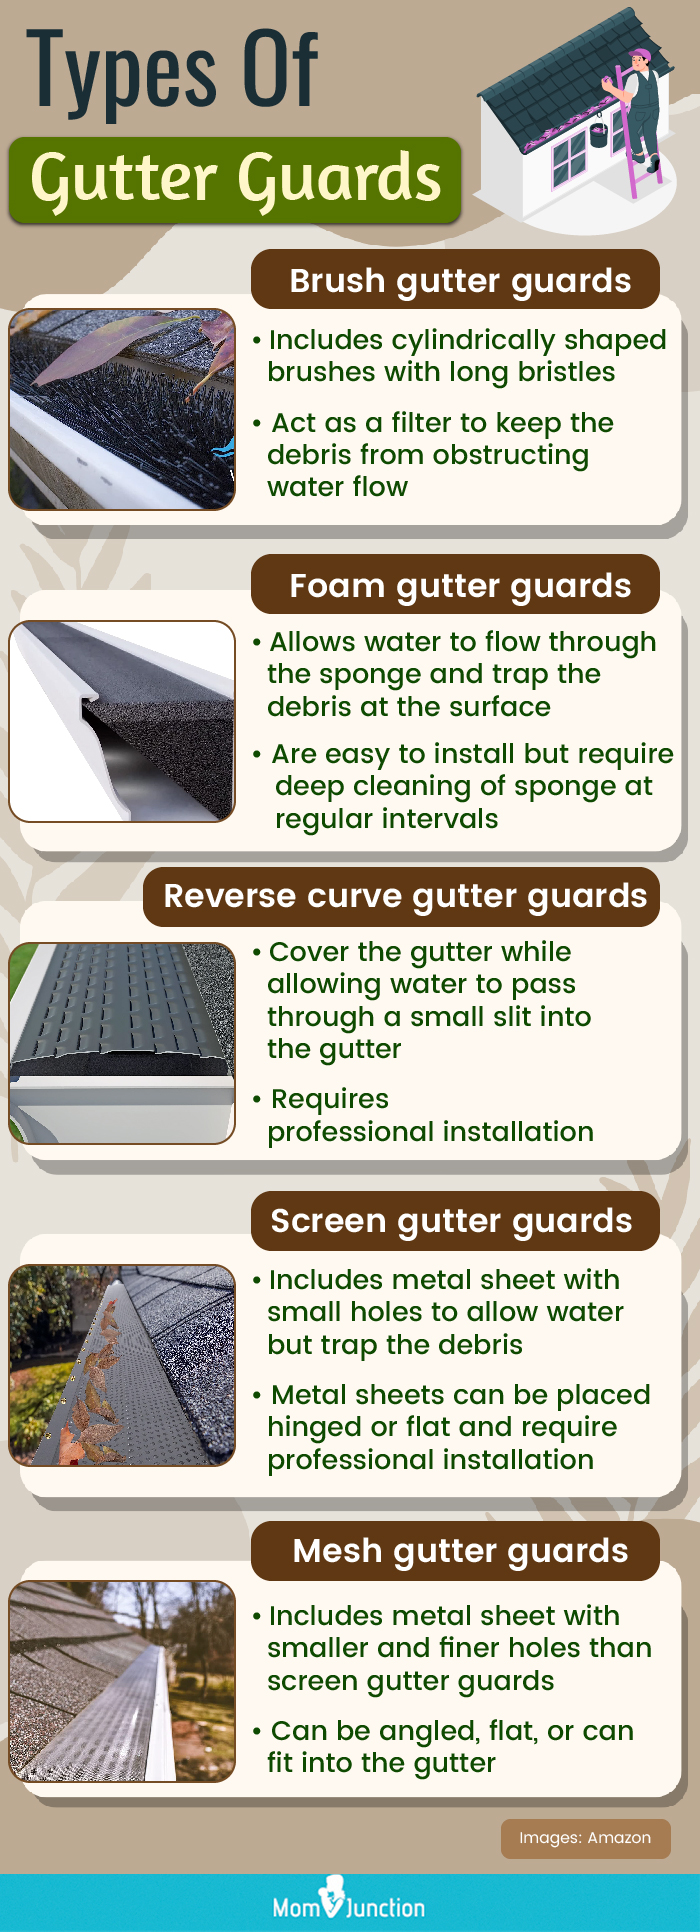 Types Of Gutter Guards (infographic)